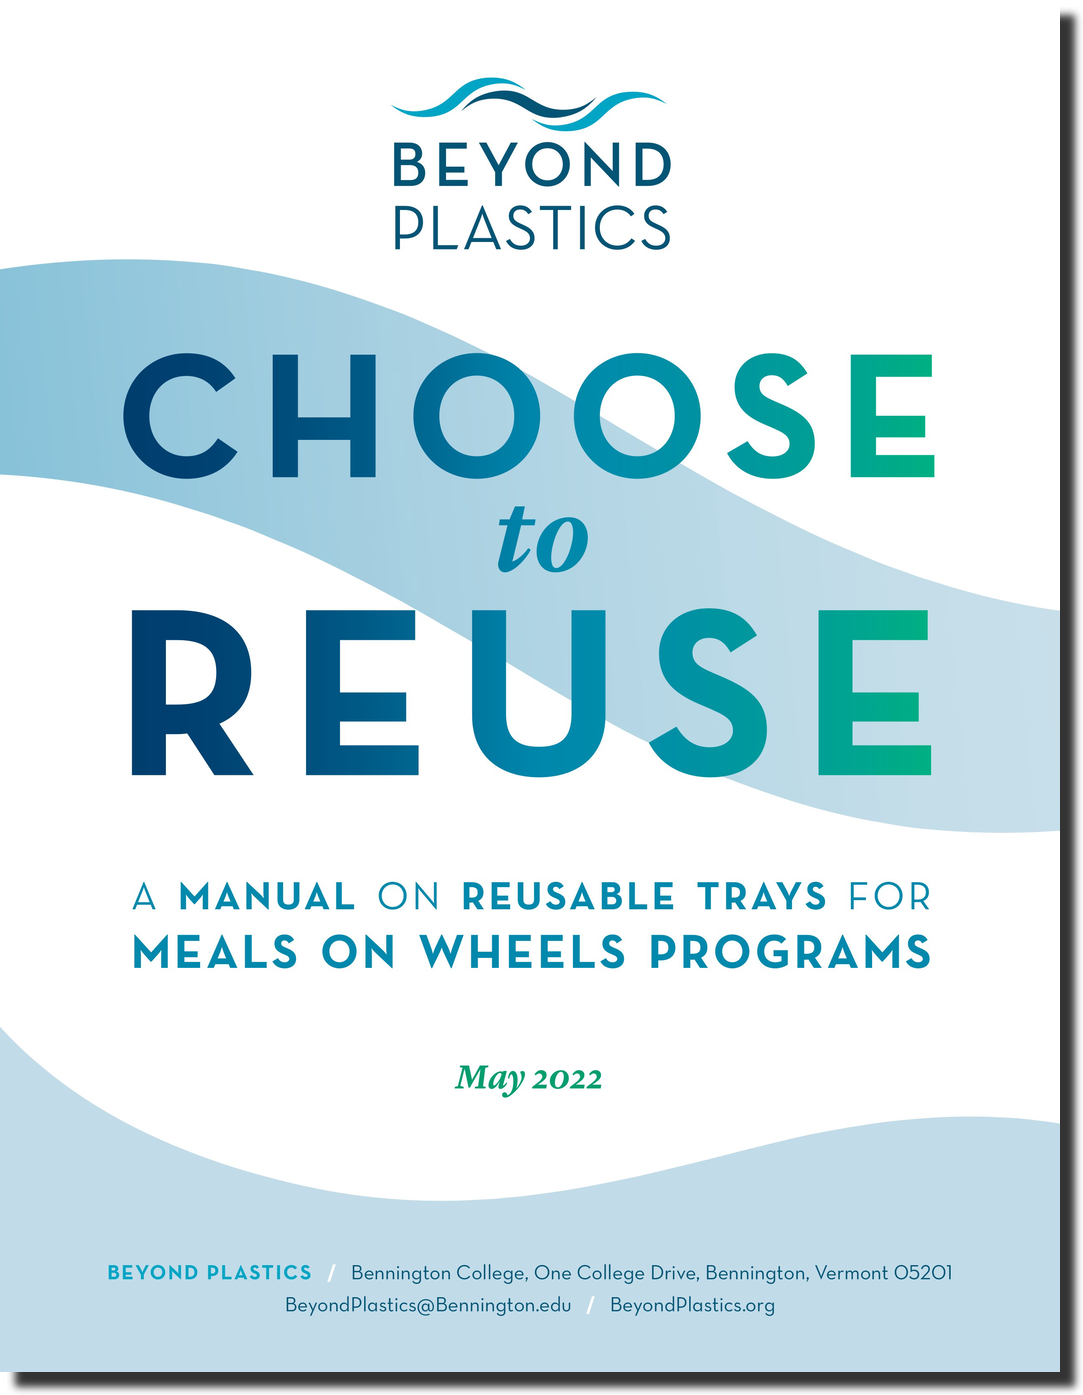 Beyond Plastics Releases Guide for Meals on Wheels Programs to Switch to Reusable Dishes